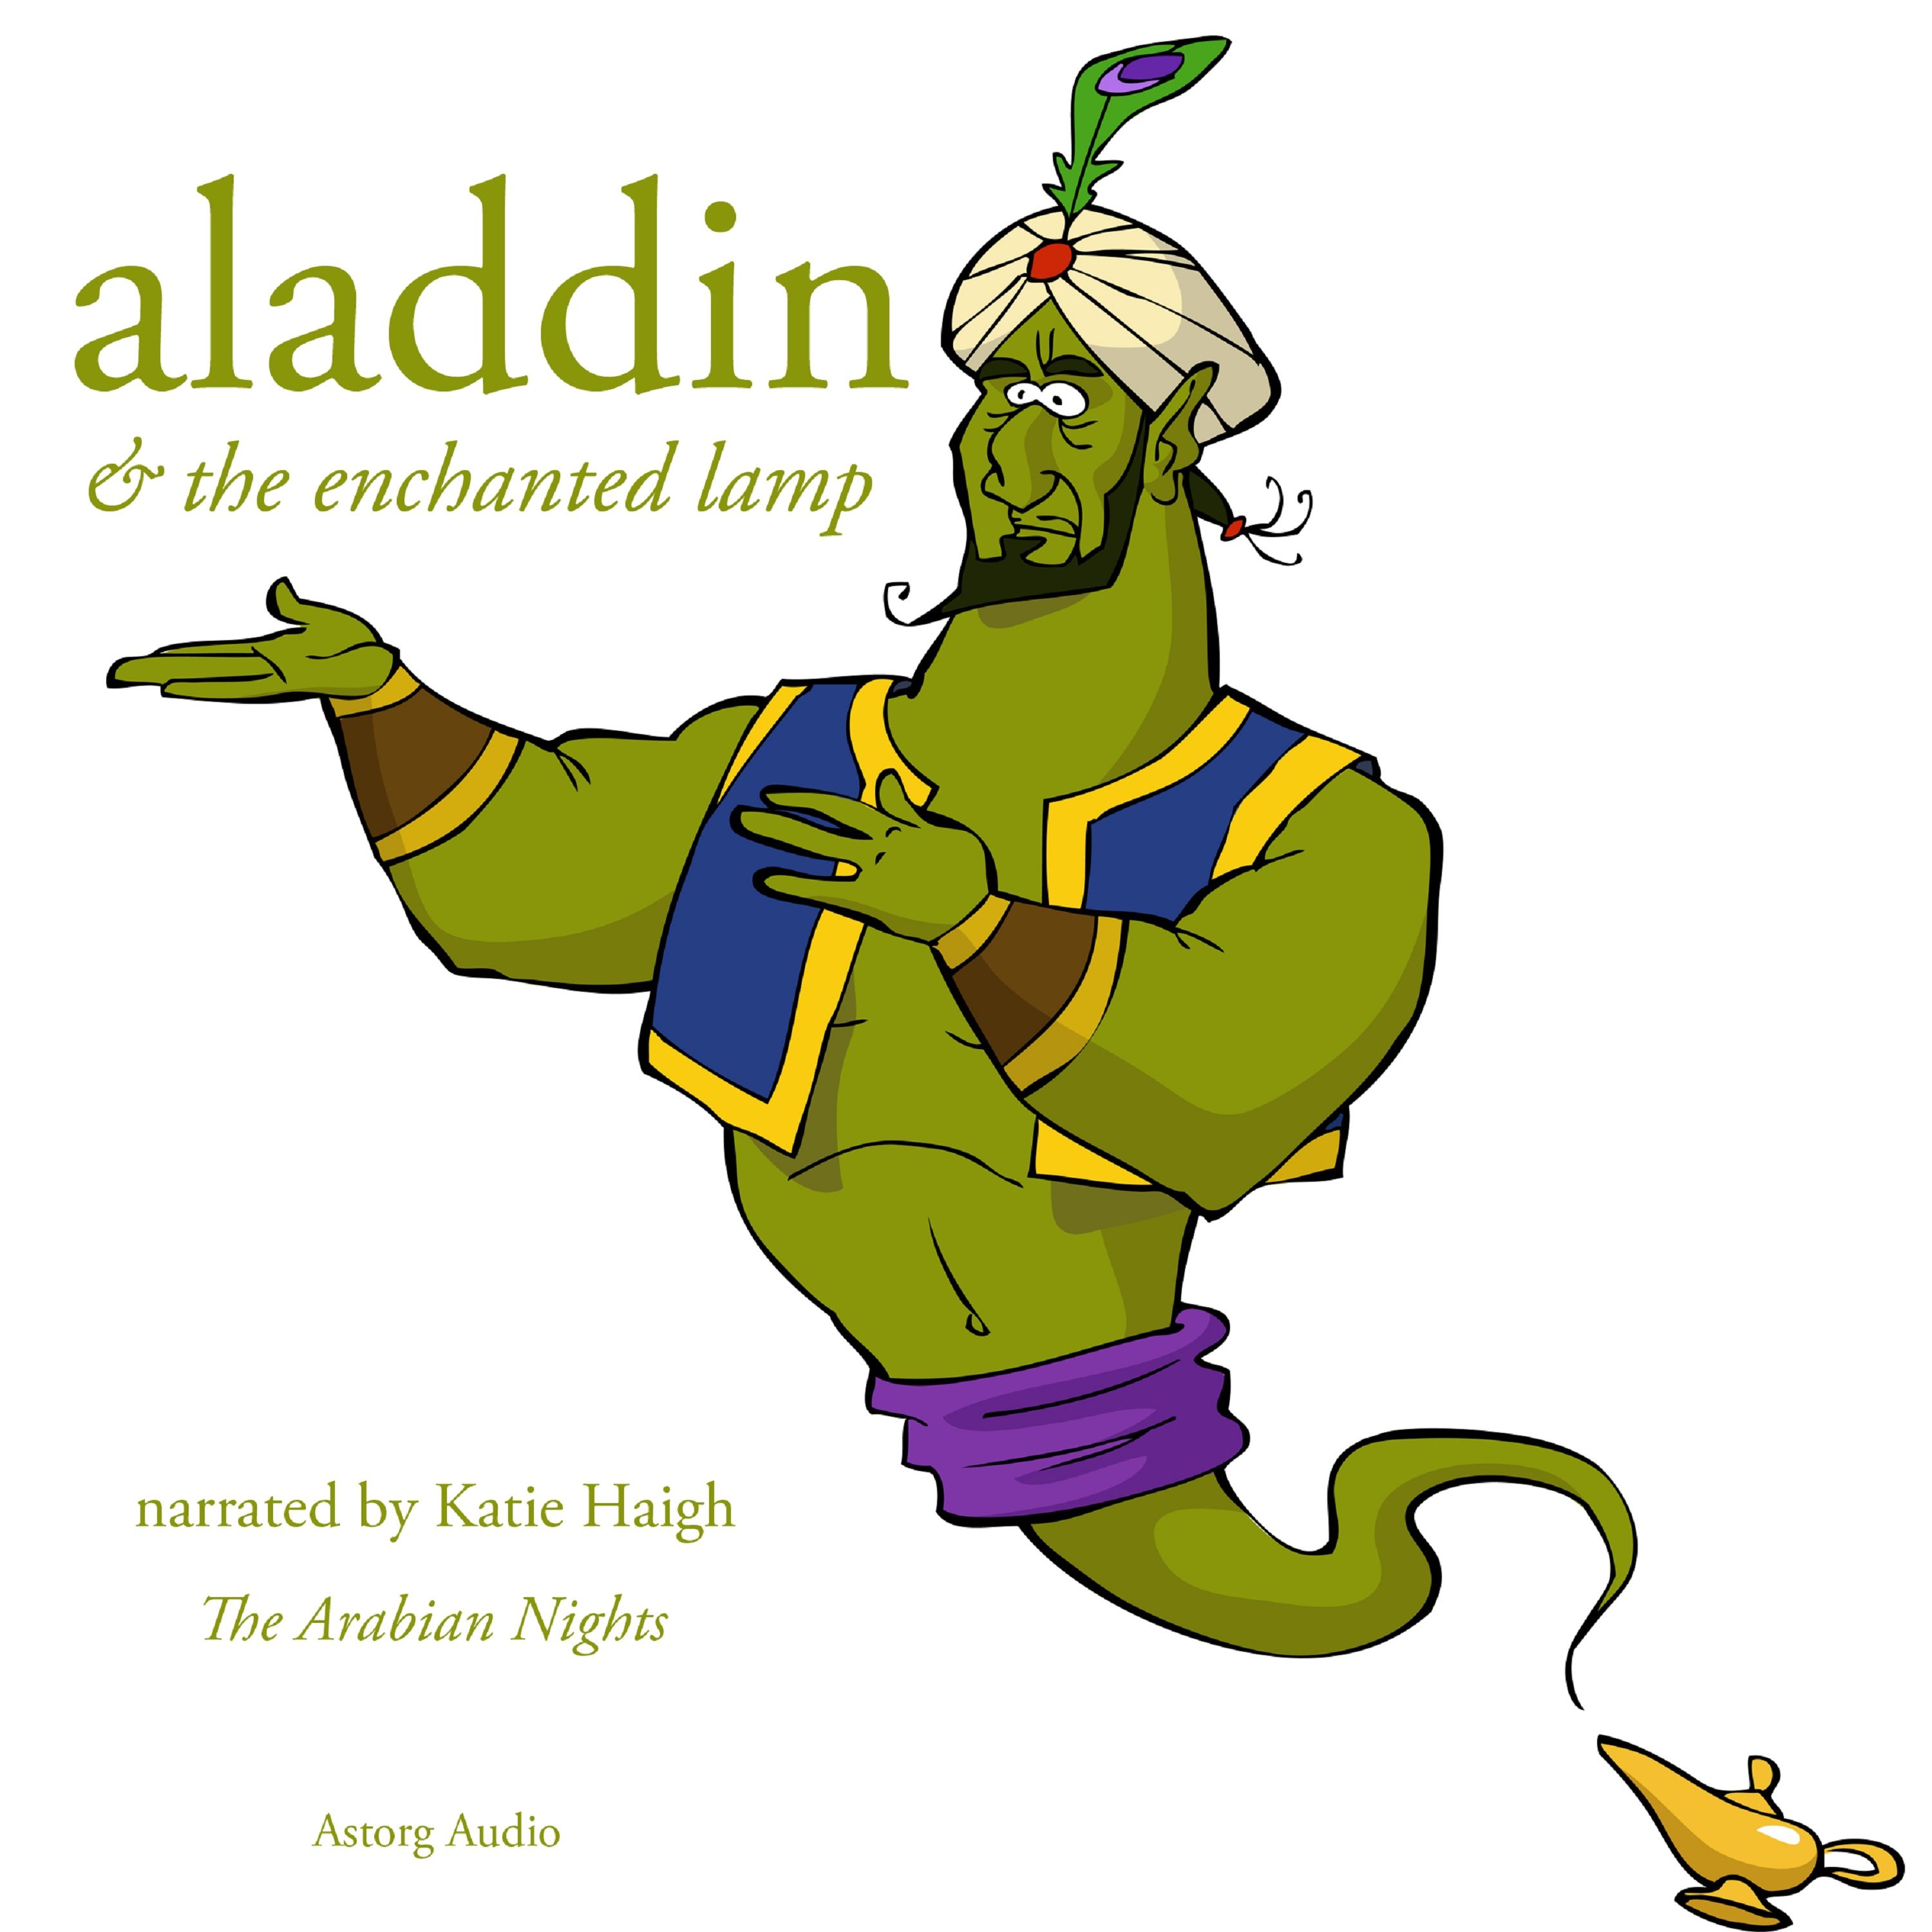 Aladdin and the Enchanted Lamp, a 1001 Nights Fairy Tale, audiobook by The Arabian Nights